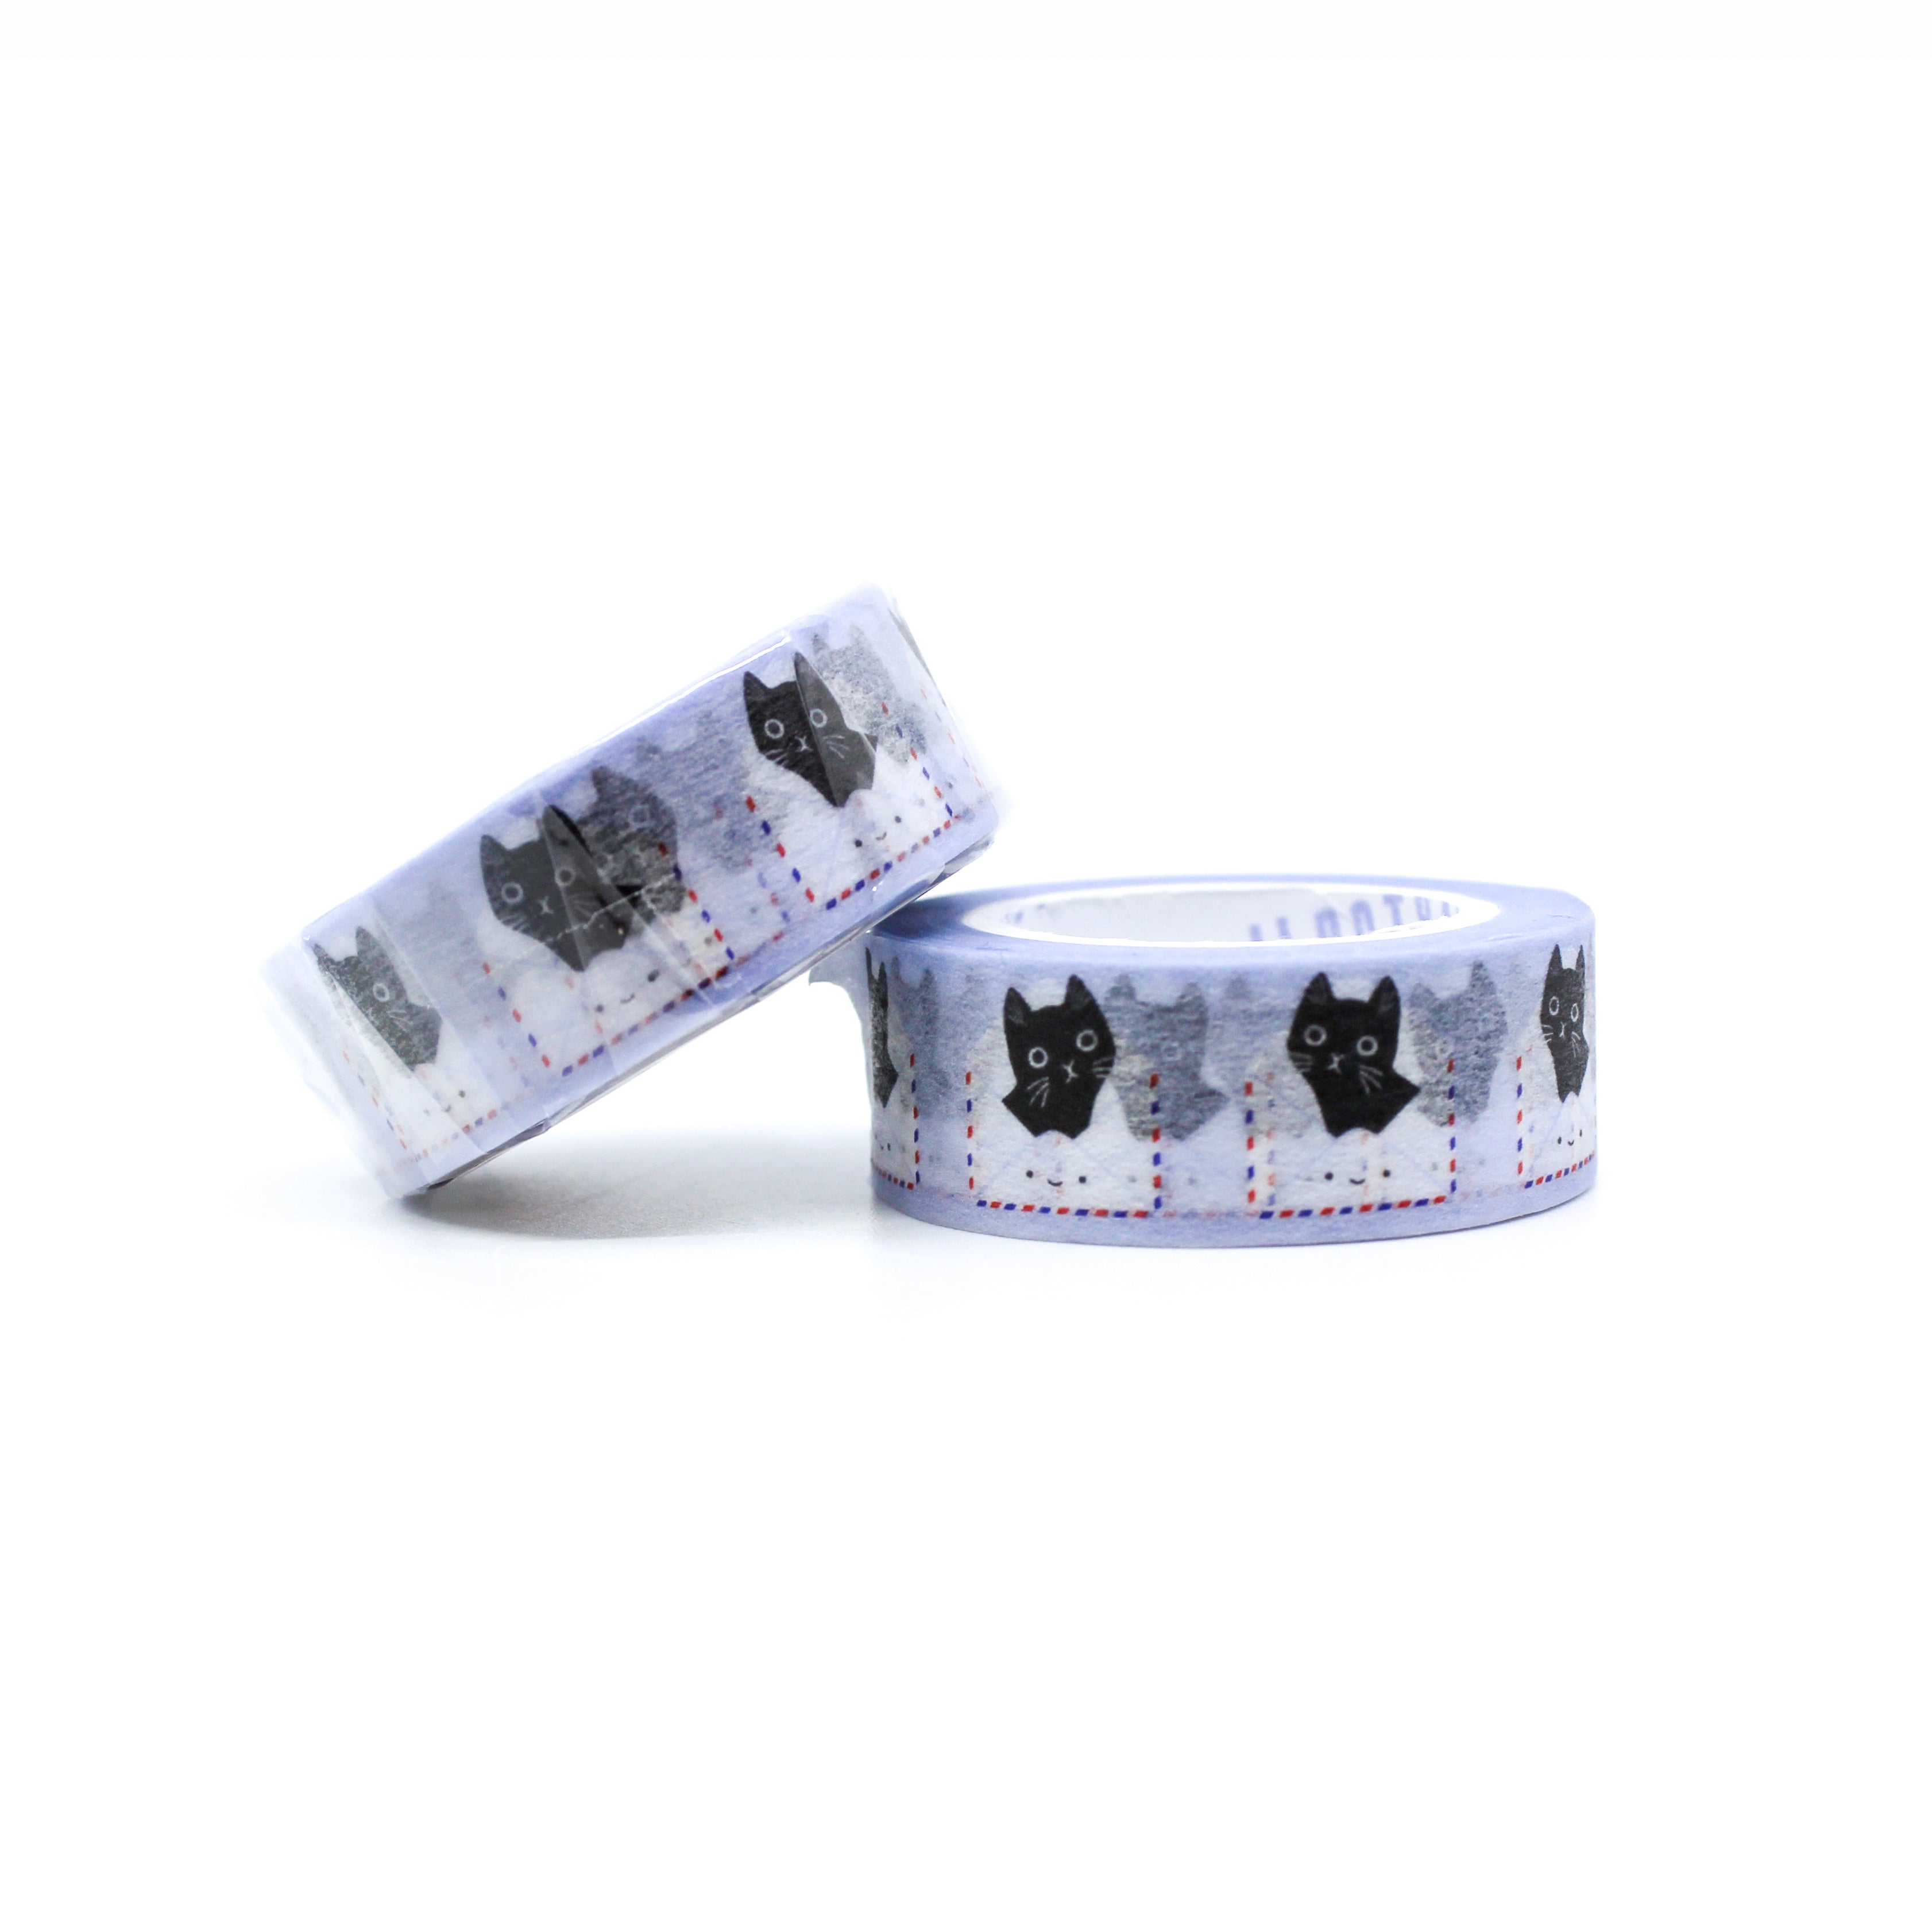 This is a roll of black cat and snail mail washi tapes from BBB Supplies Craft Shop